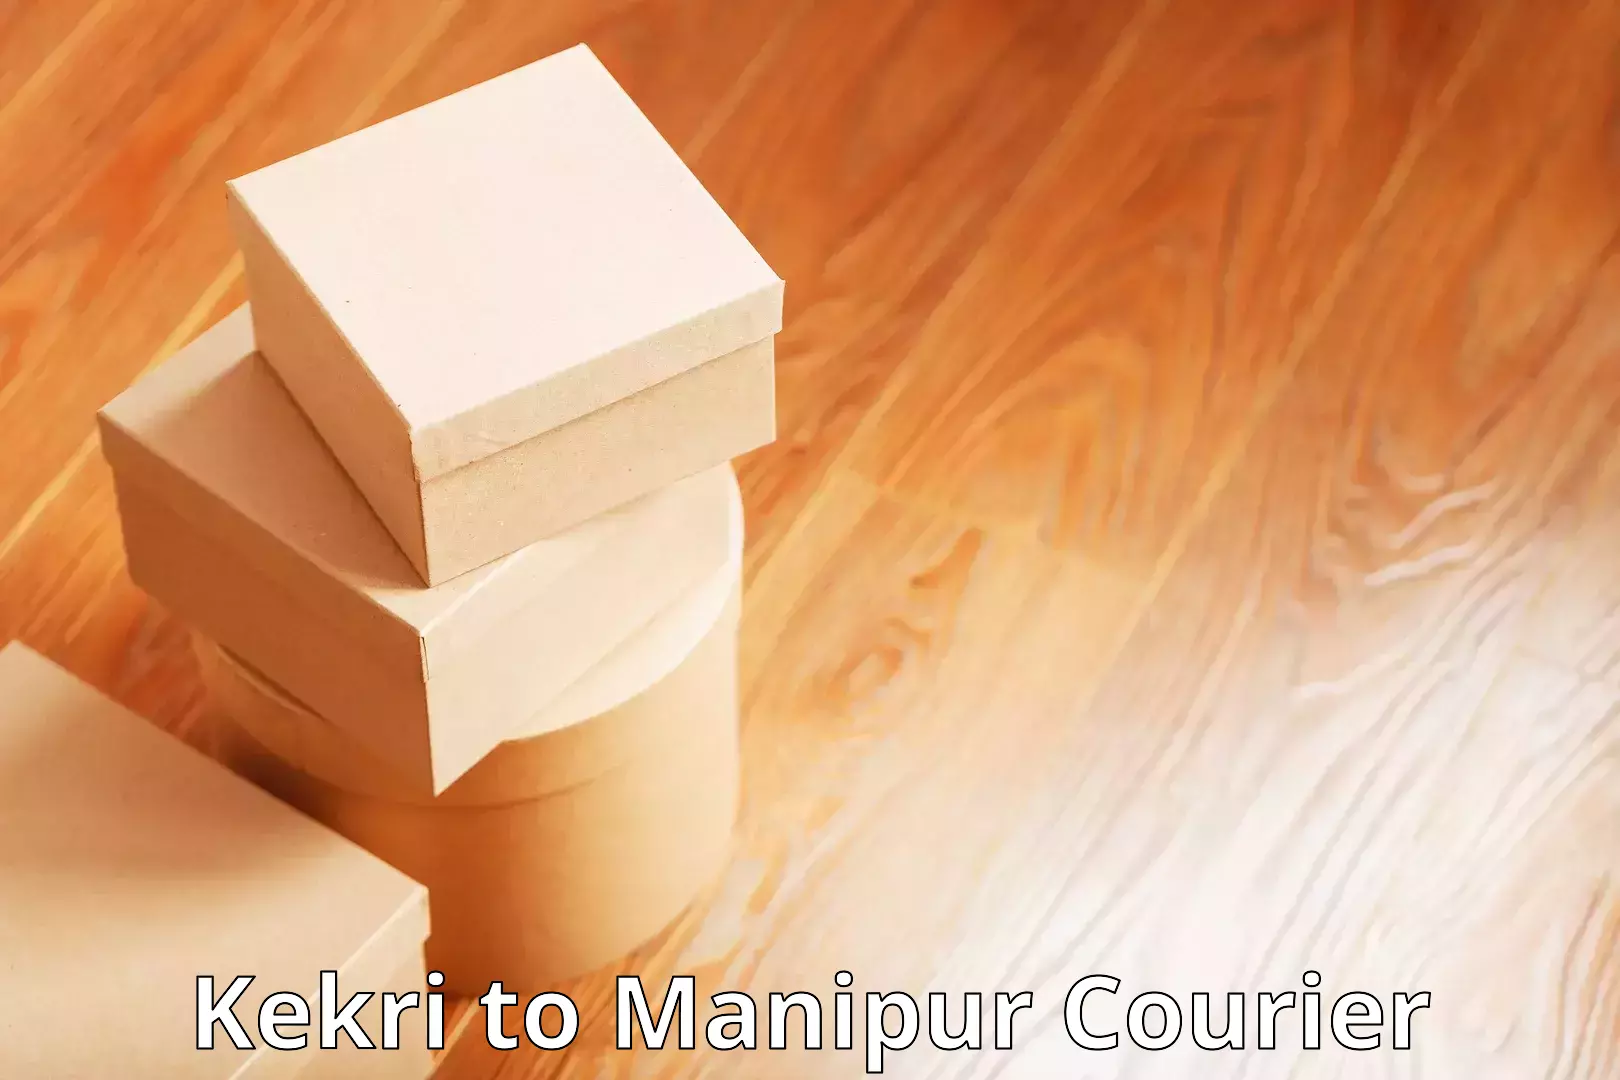 Cash on delivery service Kekri to Manipur